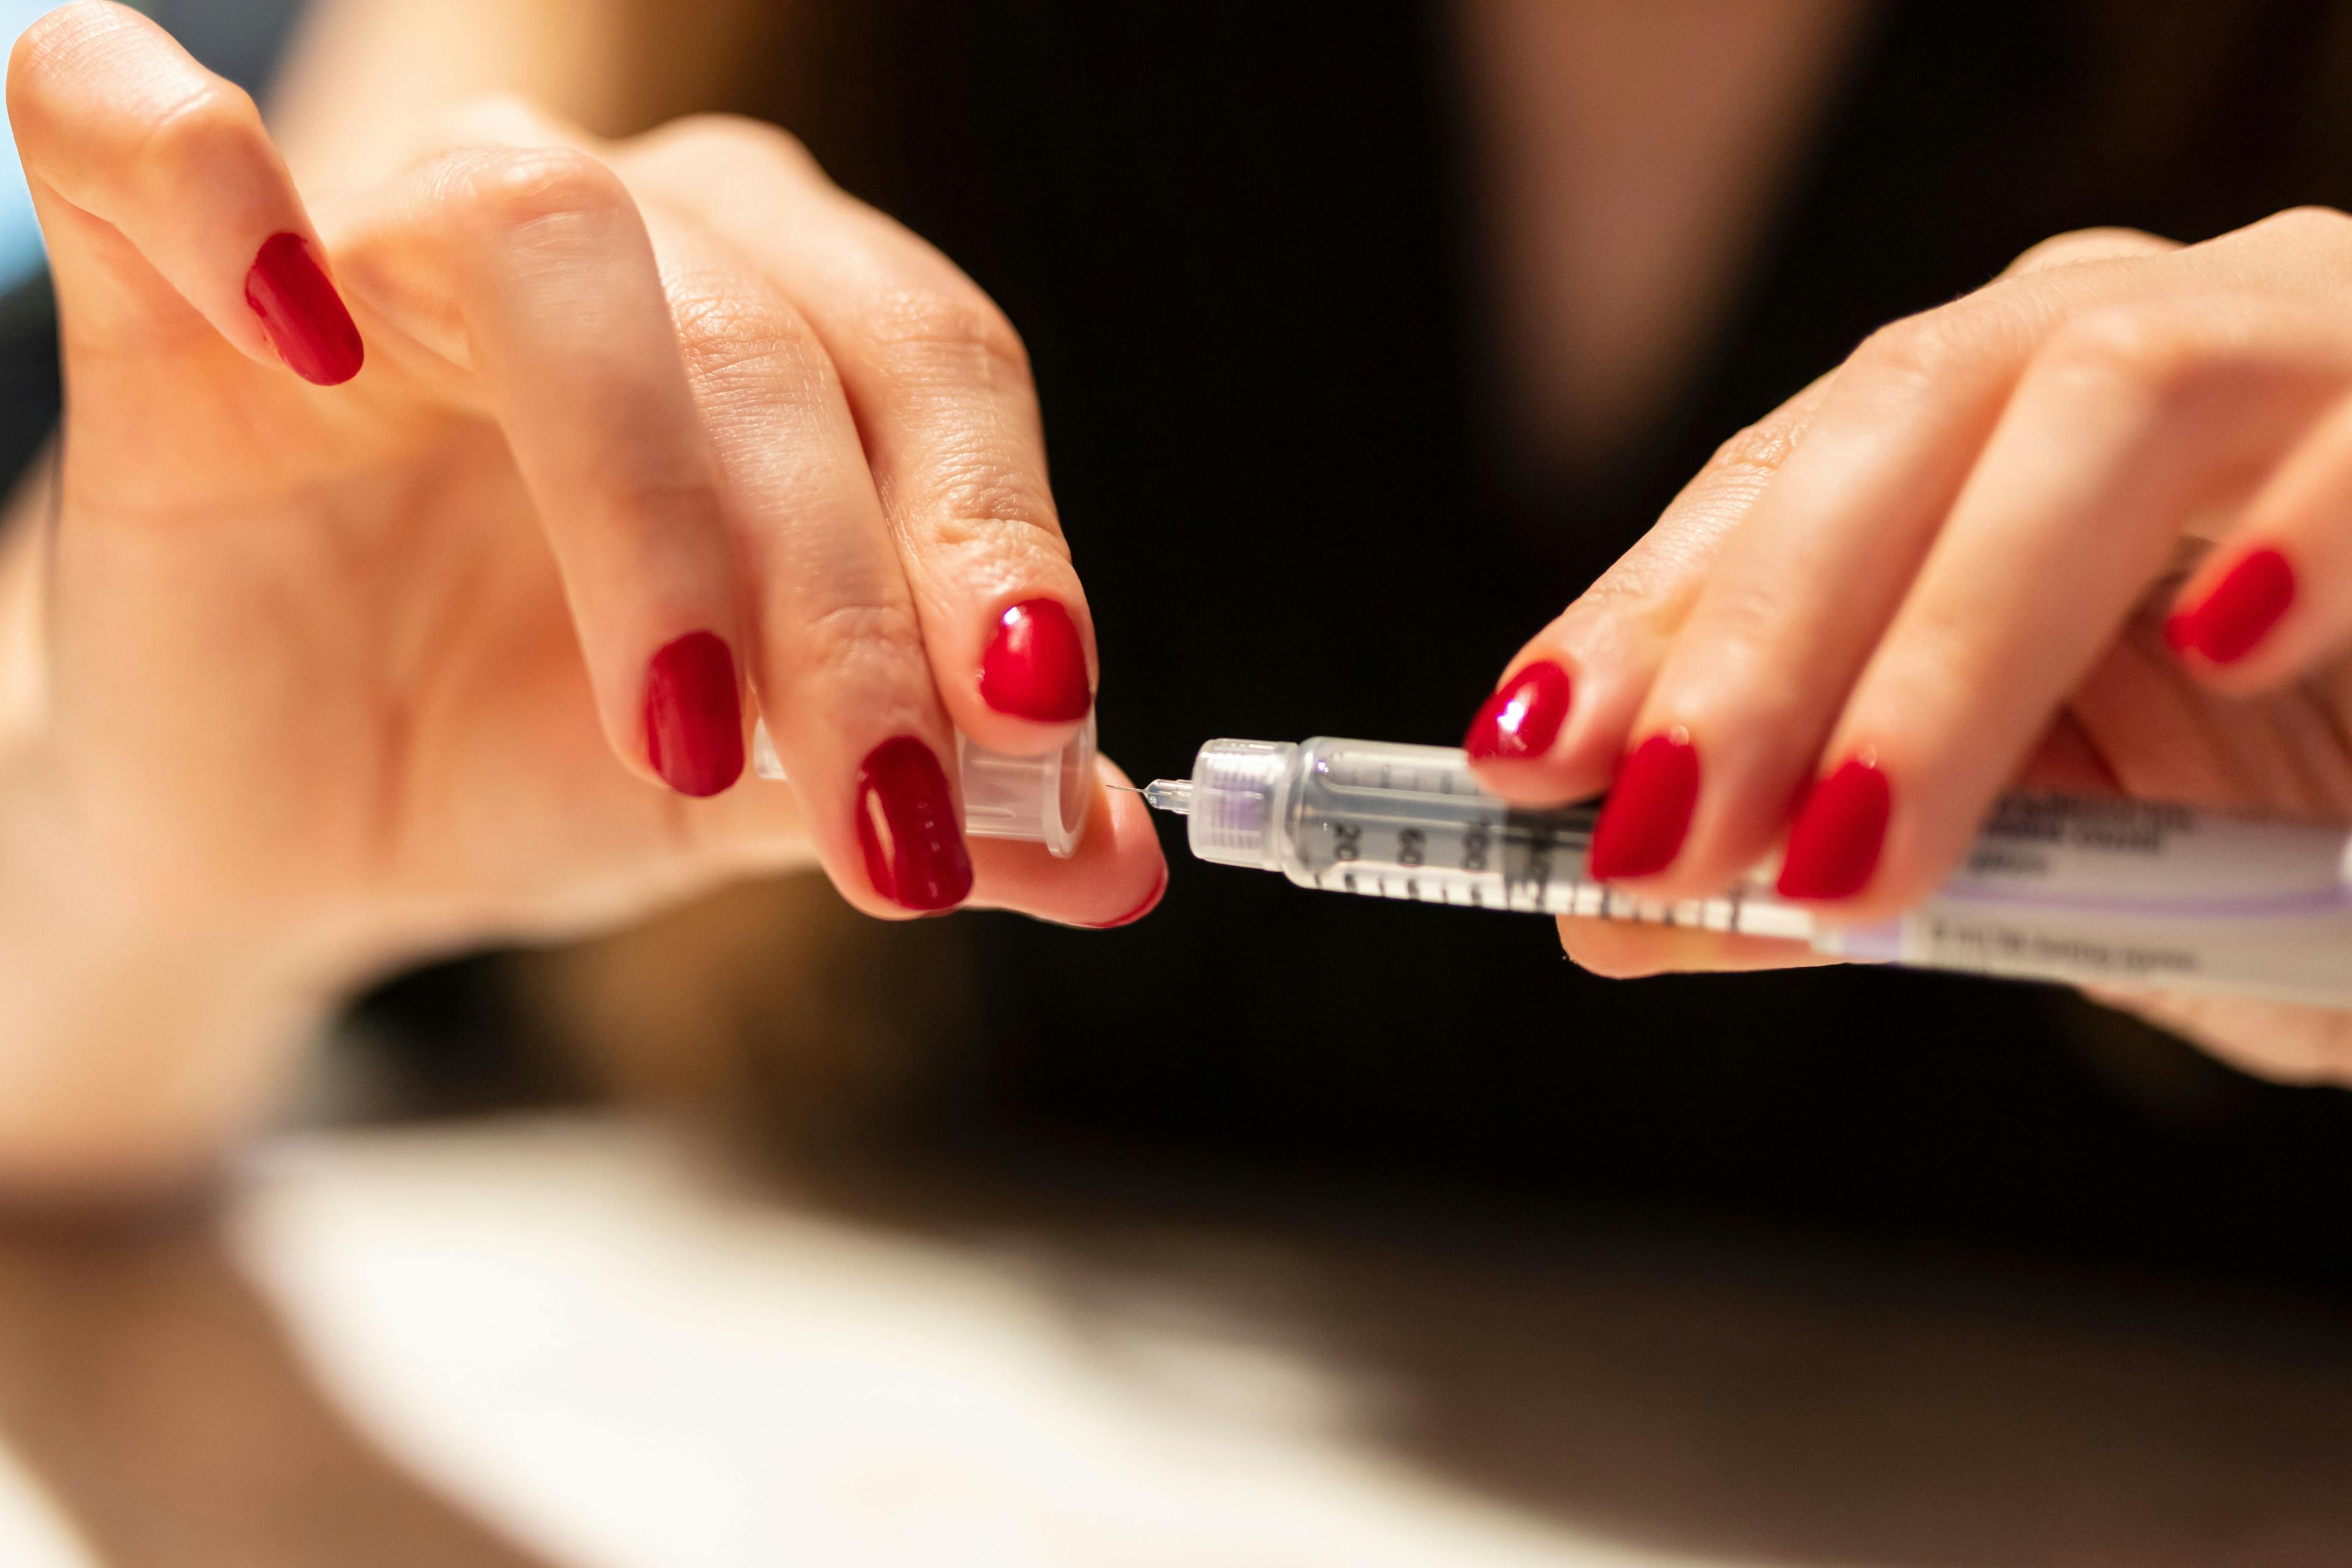 Woman holding an injection pen for diabetic - Image credit: nazif | stock.adobe.com